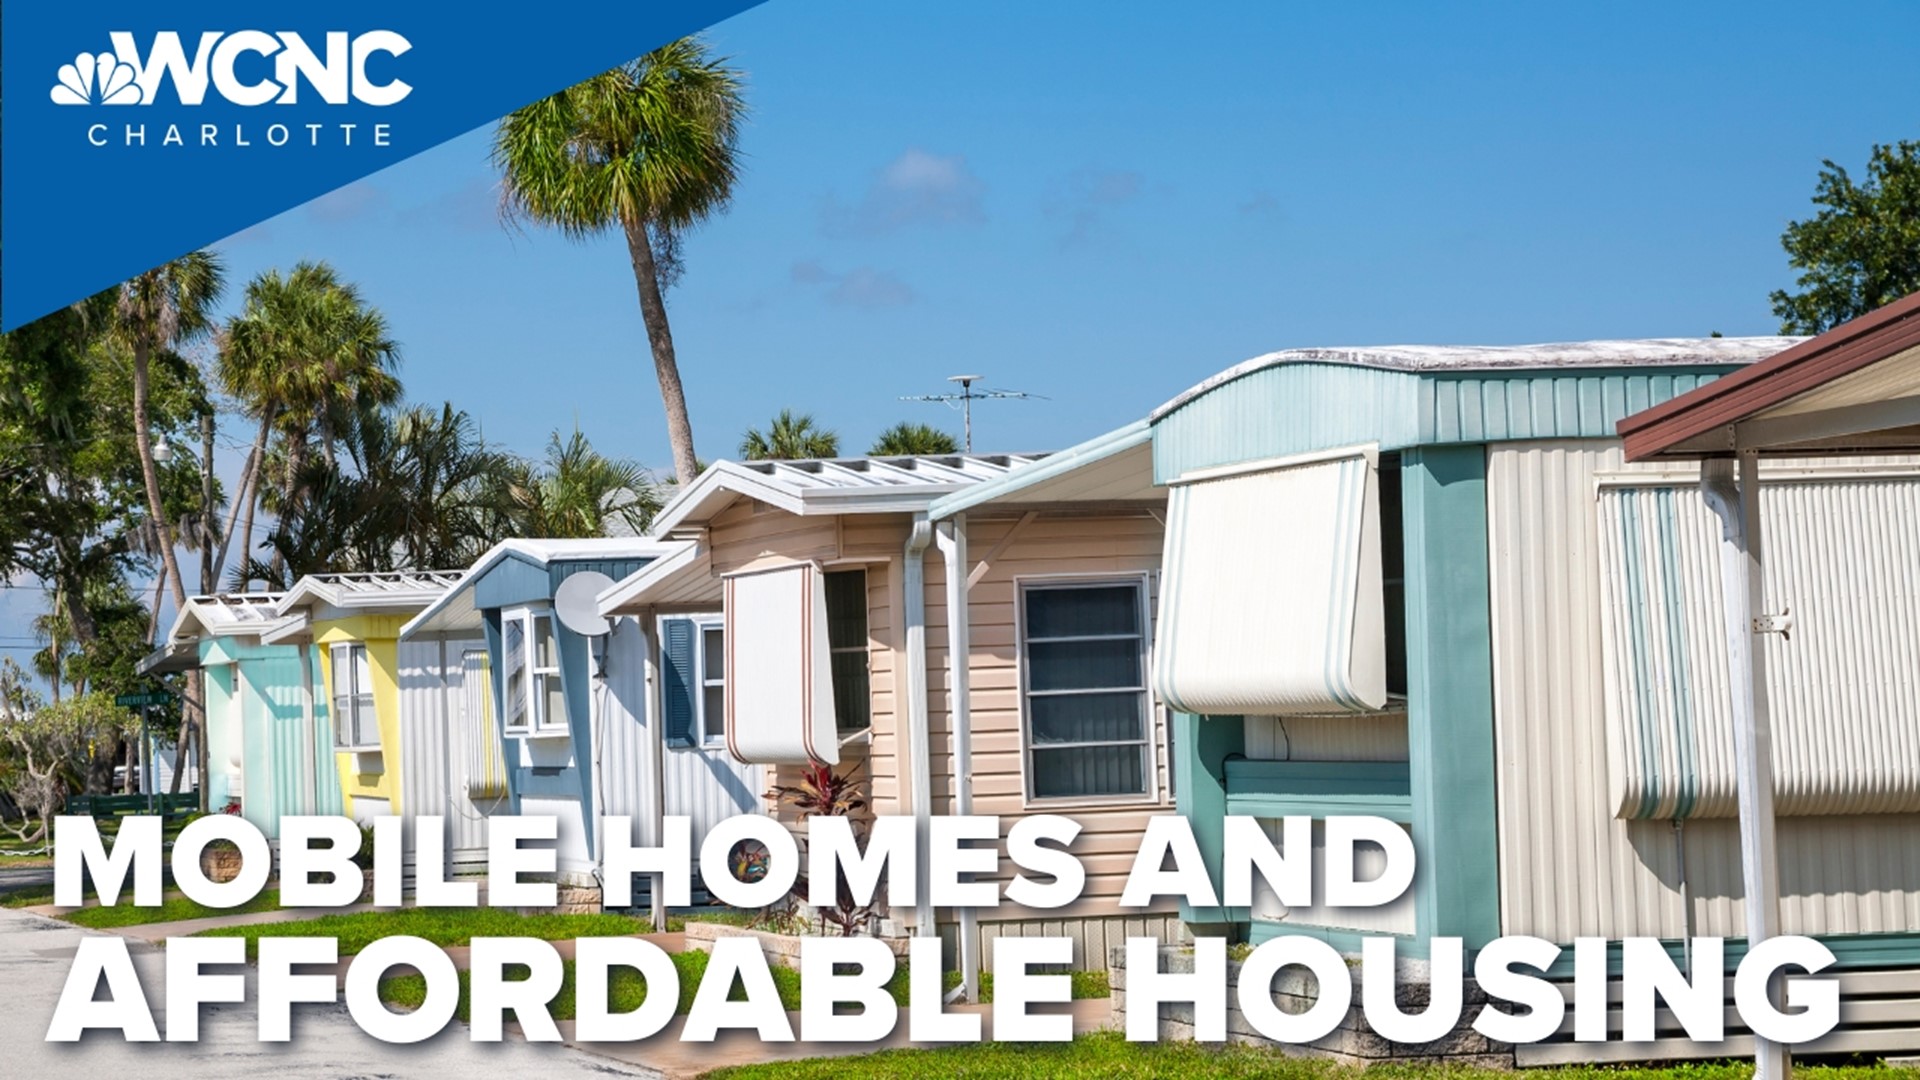 County leaders are looking at a way to turn an aging mobile home park into a new community with a promise that these houses will stay affordable.